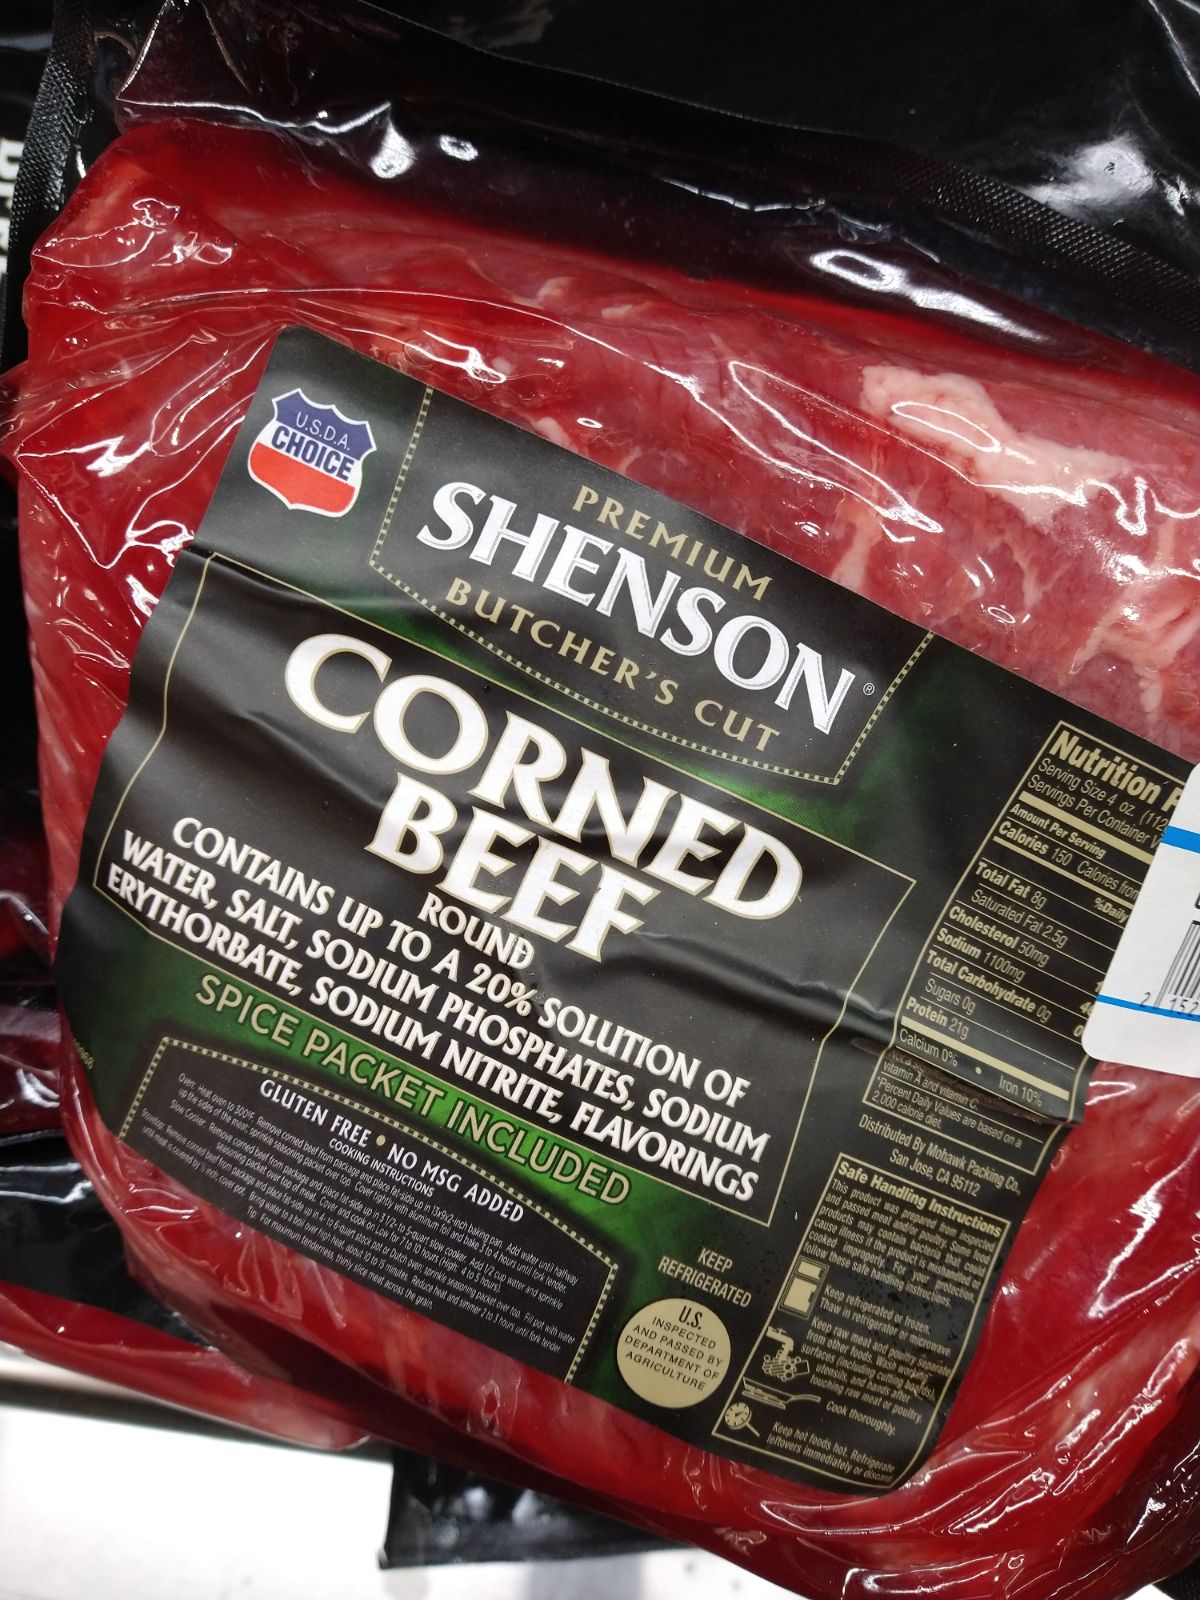 Shenson Butcher's Cut Corned Beef Round in package at a Costco store.